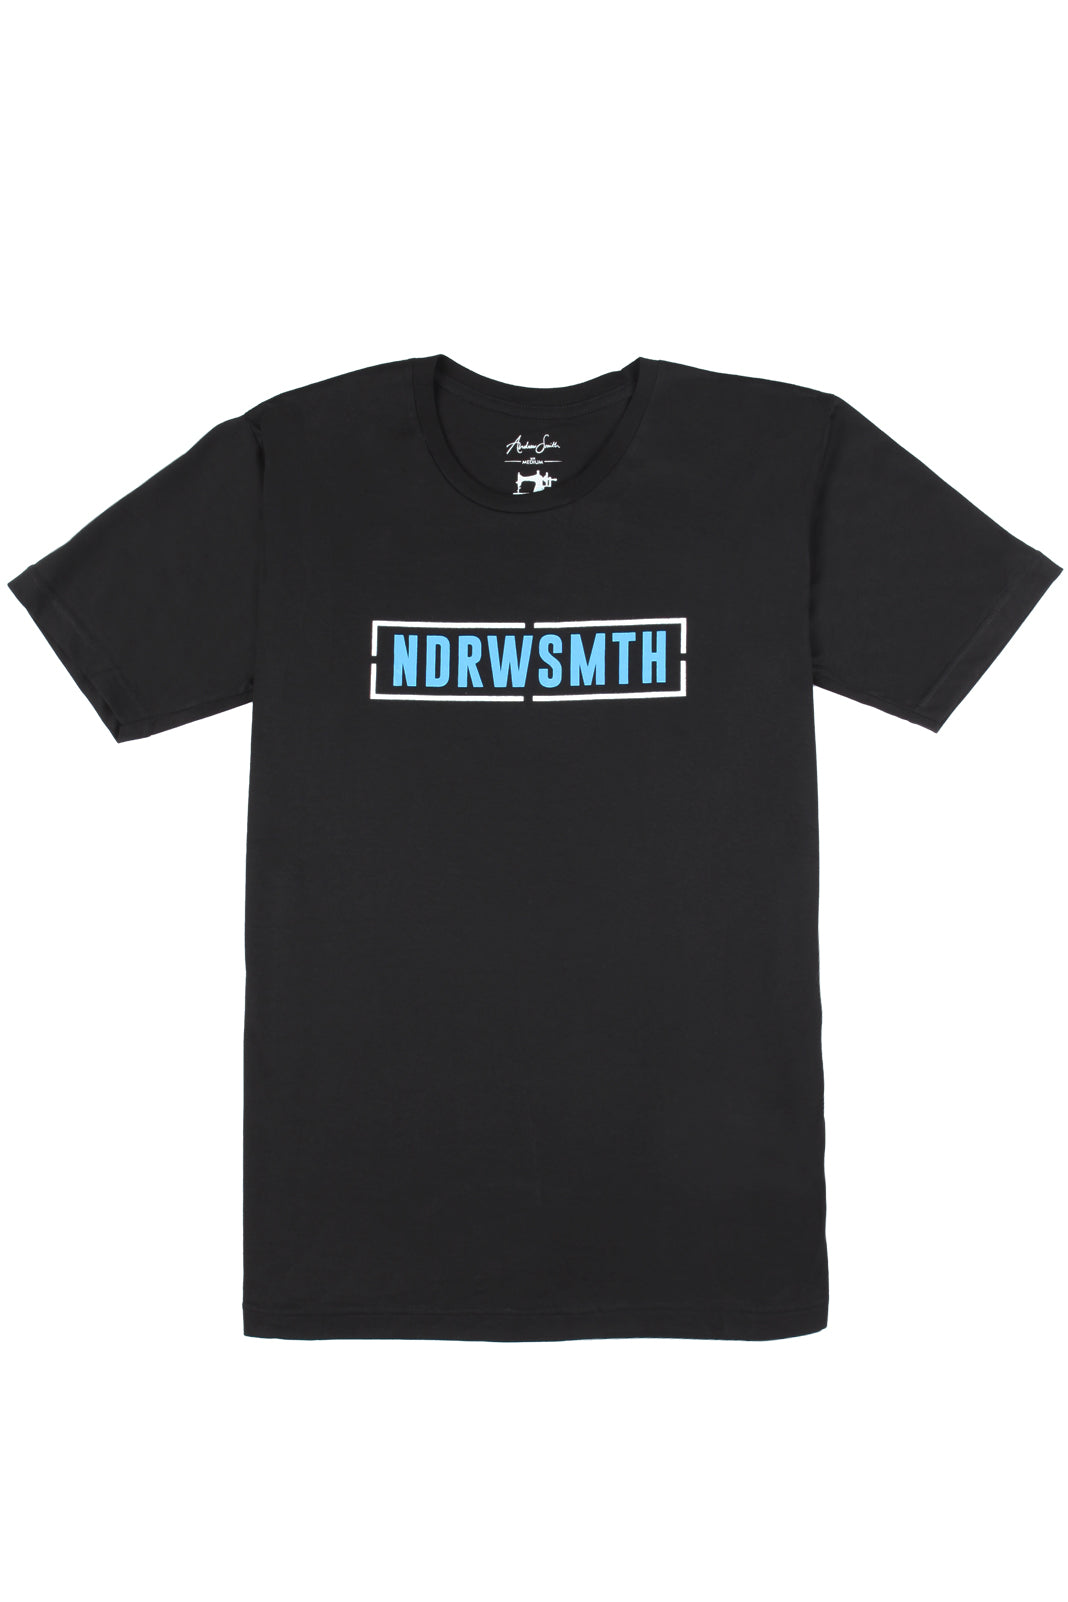 Andrew Smith T-Shirt Slim Fit Pria A0100X01A